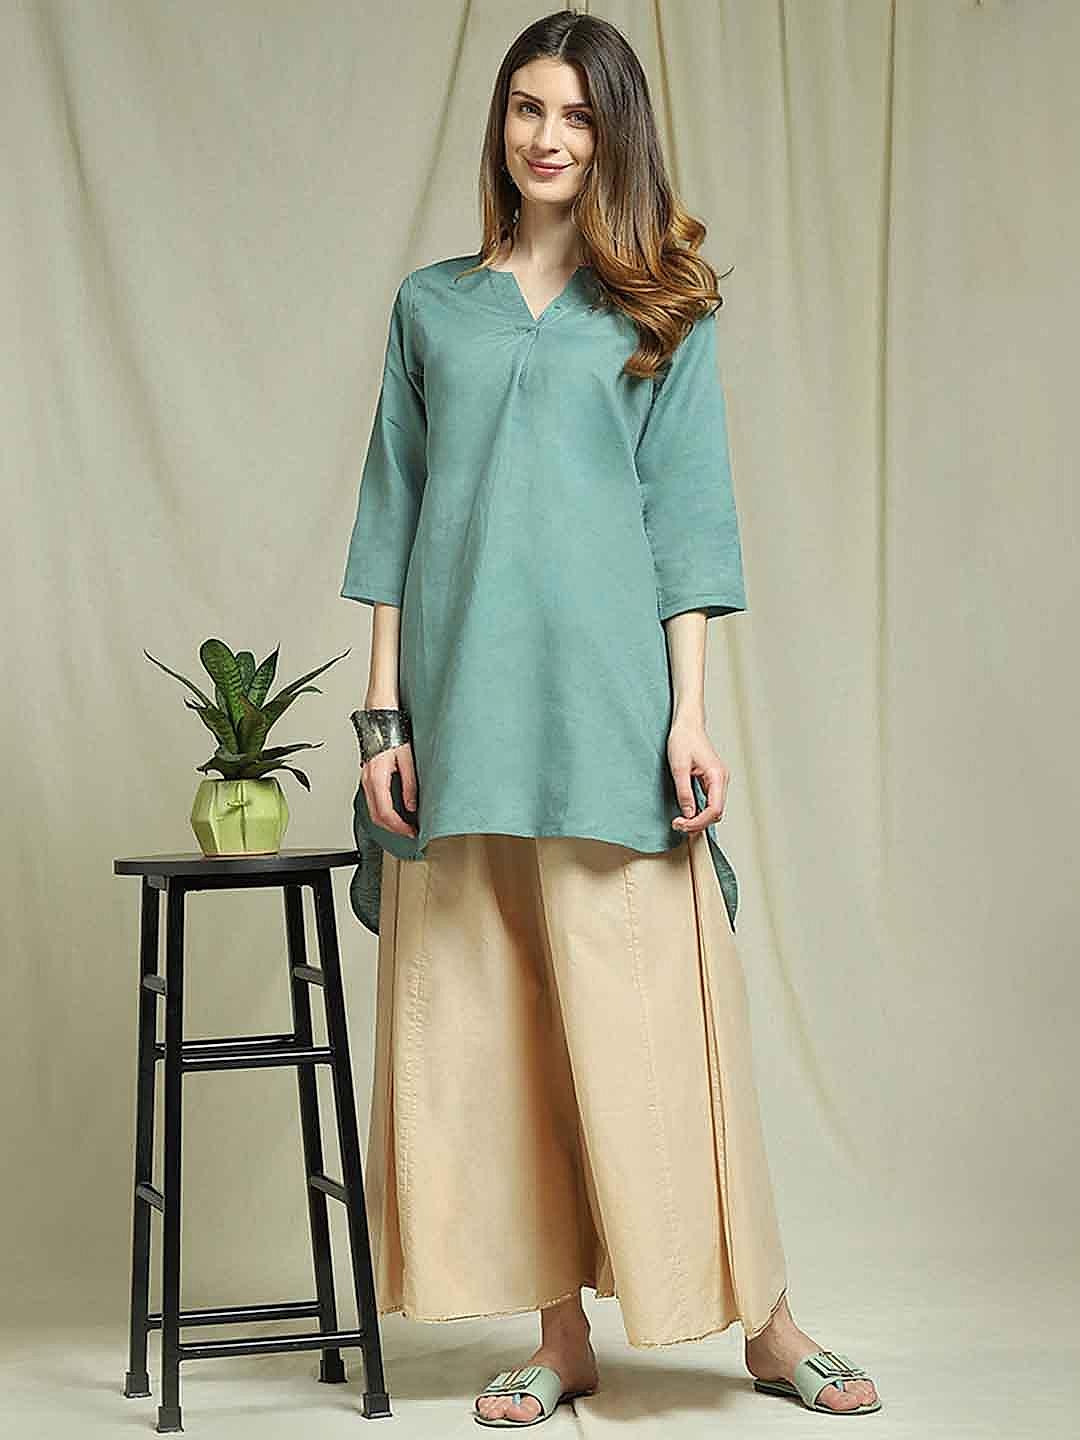 Discover 143+ high low kurti with palazzo latest